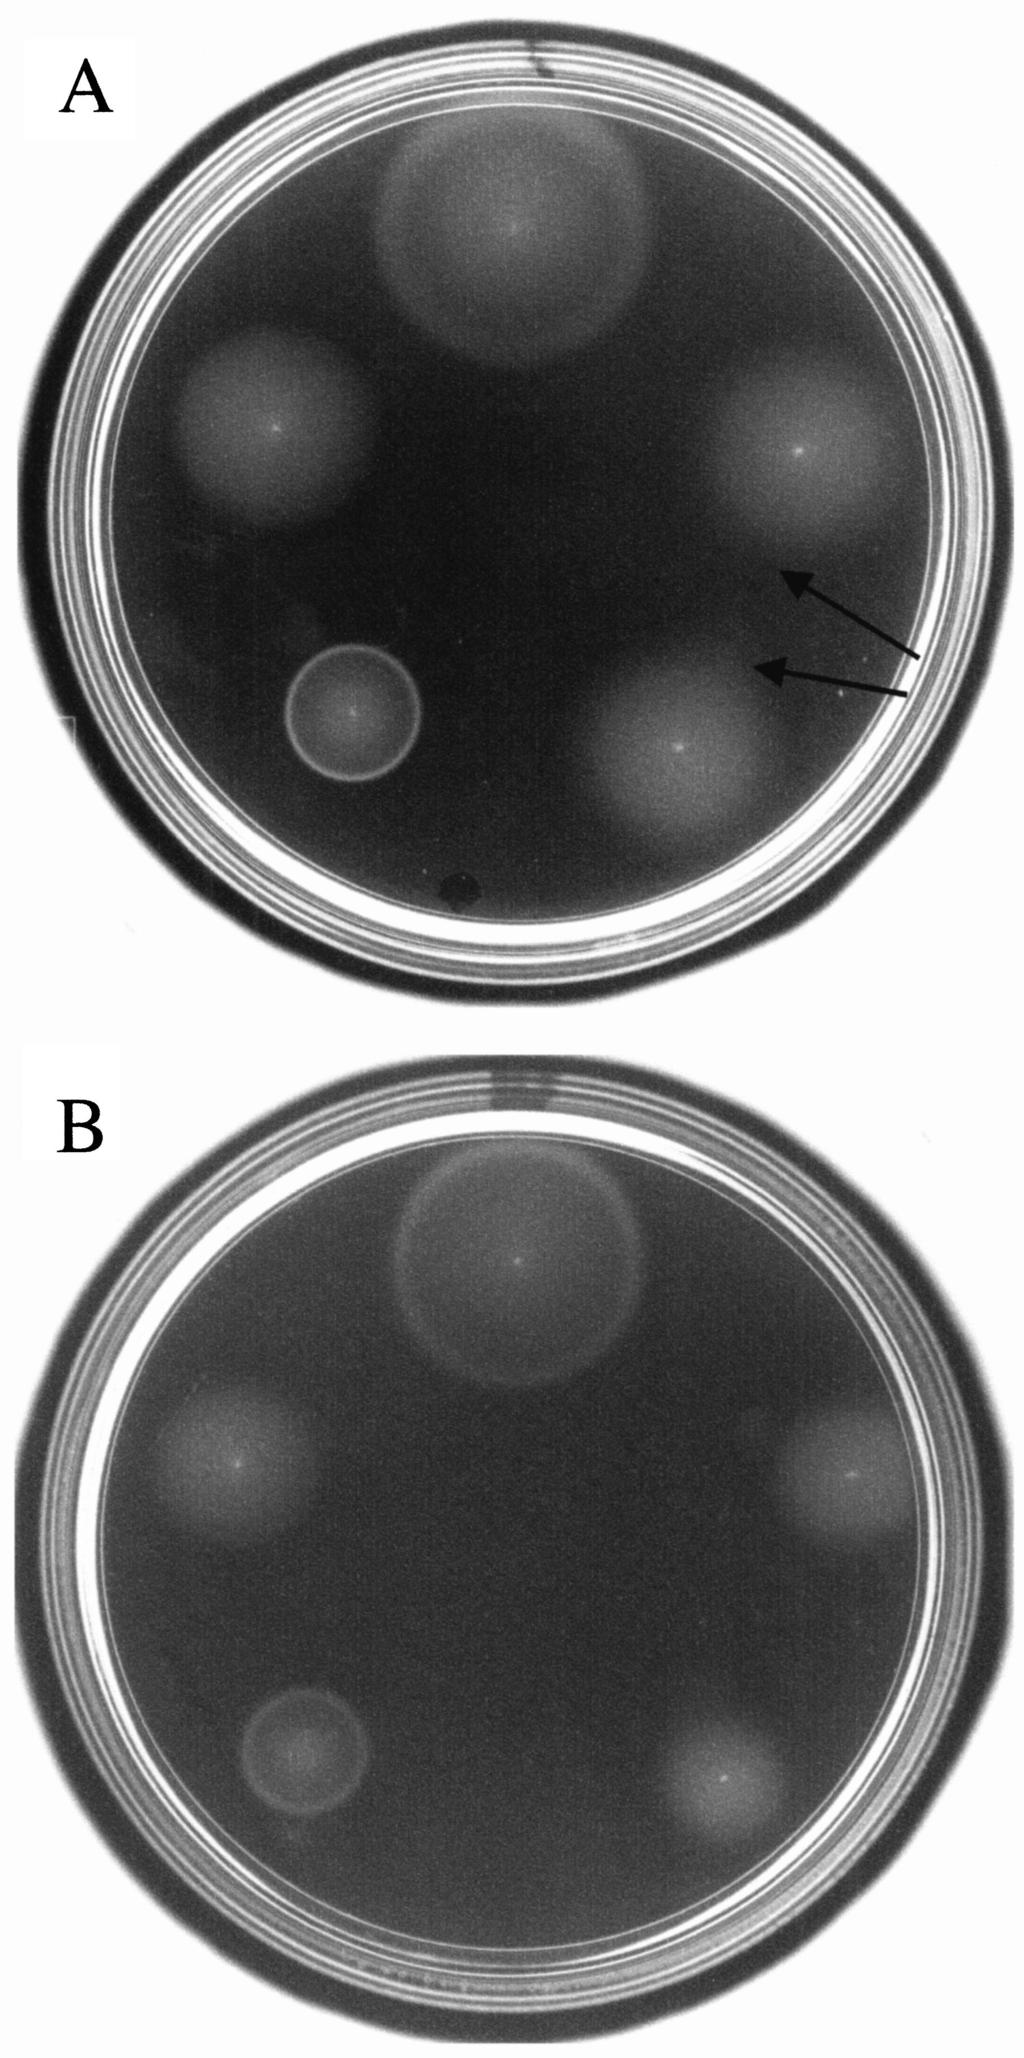 576 J. R. Kirby et al. chemotactic ring in the swarm plate assay in response to asparagine than that formed in response to proline, again consistent with the results from the capillary assay.